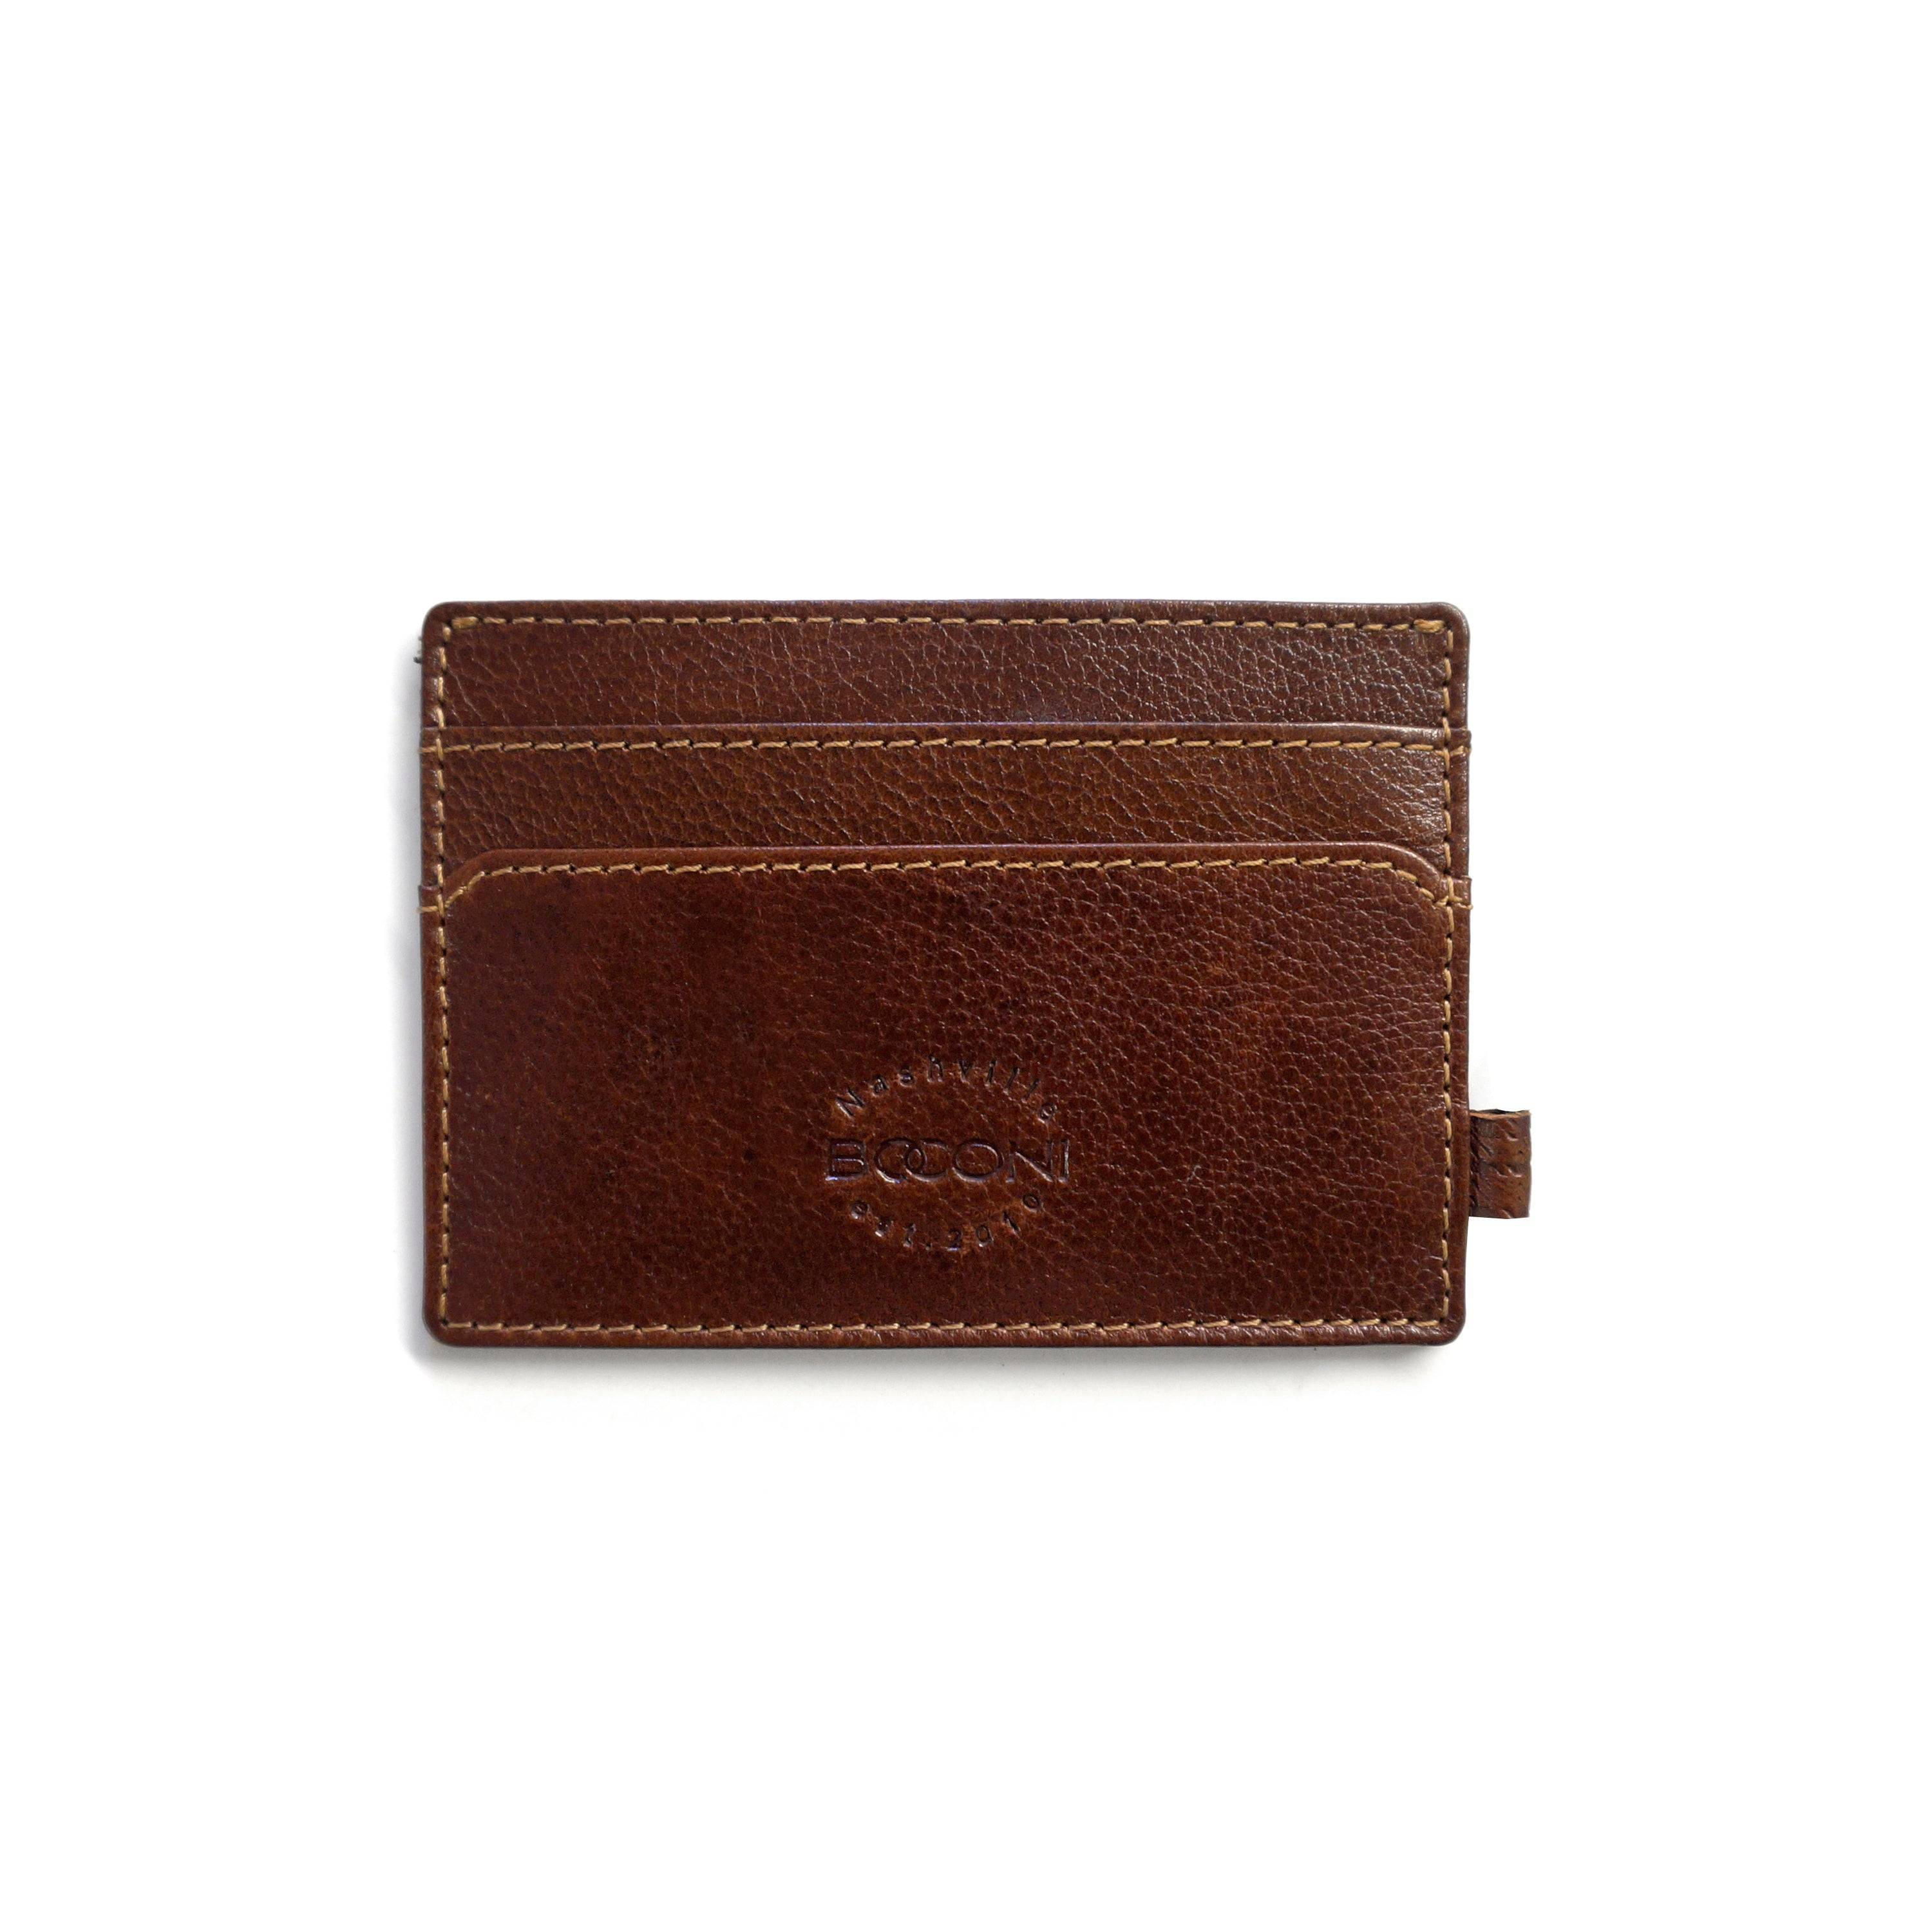 a brown leather card case on a white background